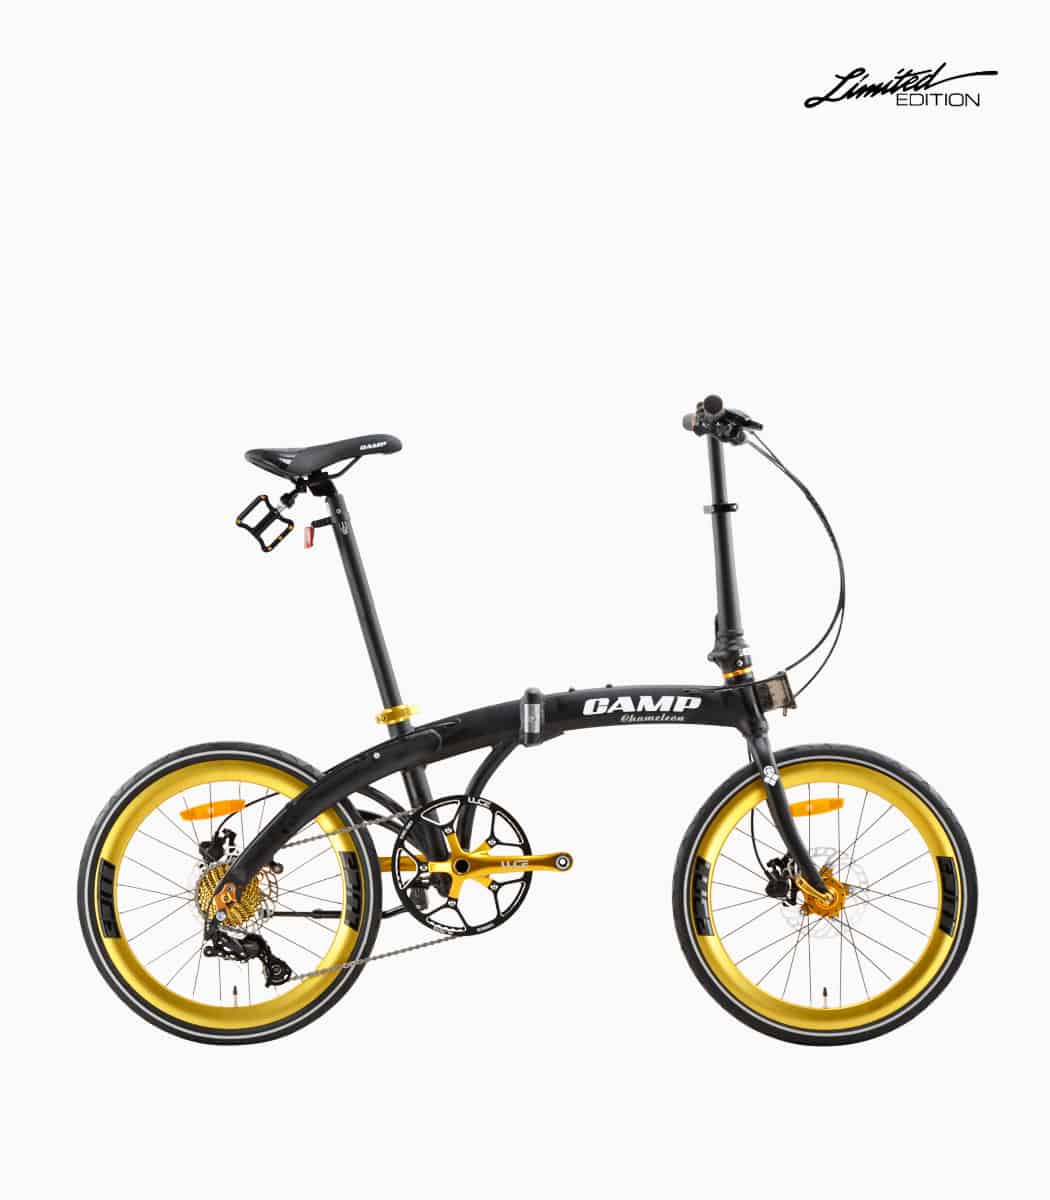 CAMP Chameleon (MATT BLACK) foldable bicycle with gold rim reflective tyres right